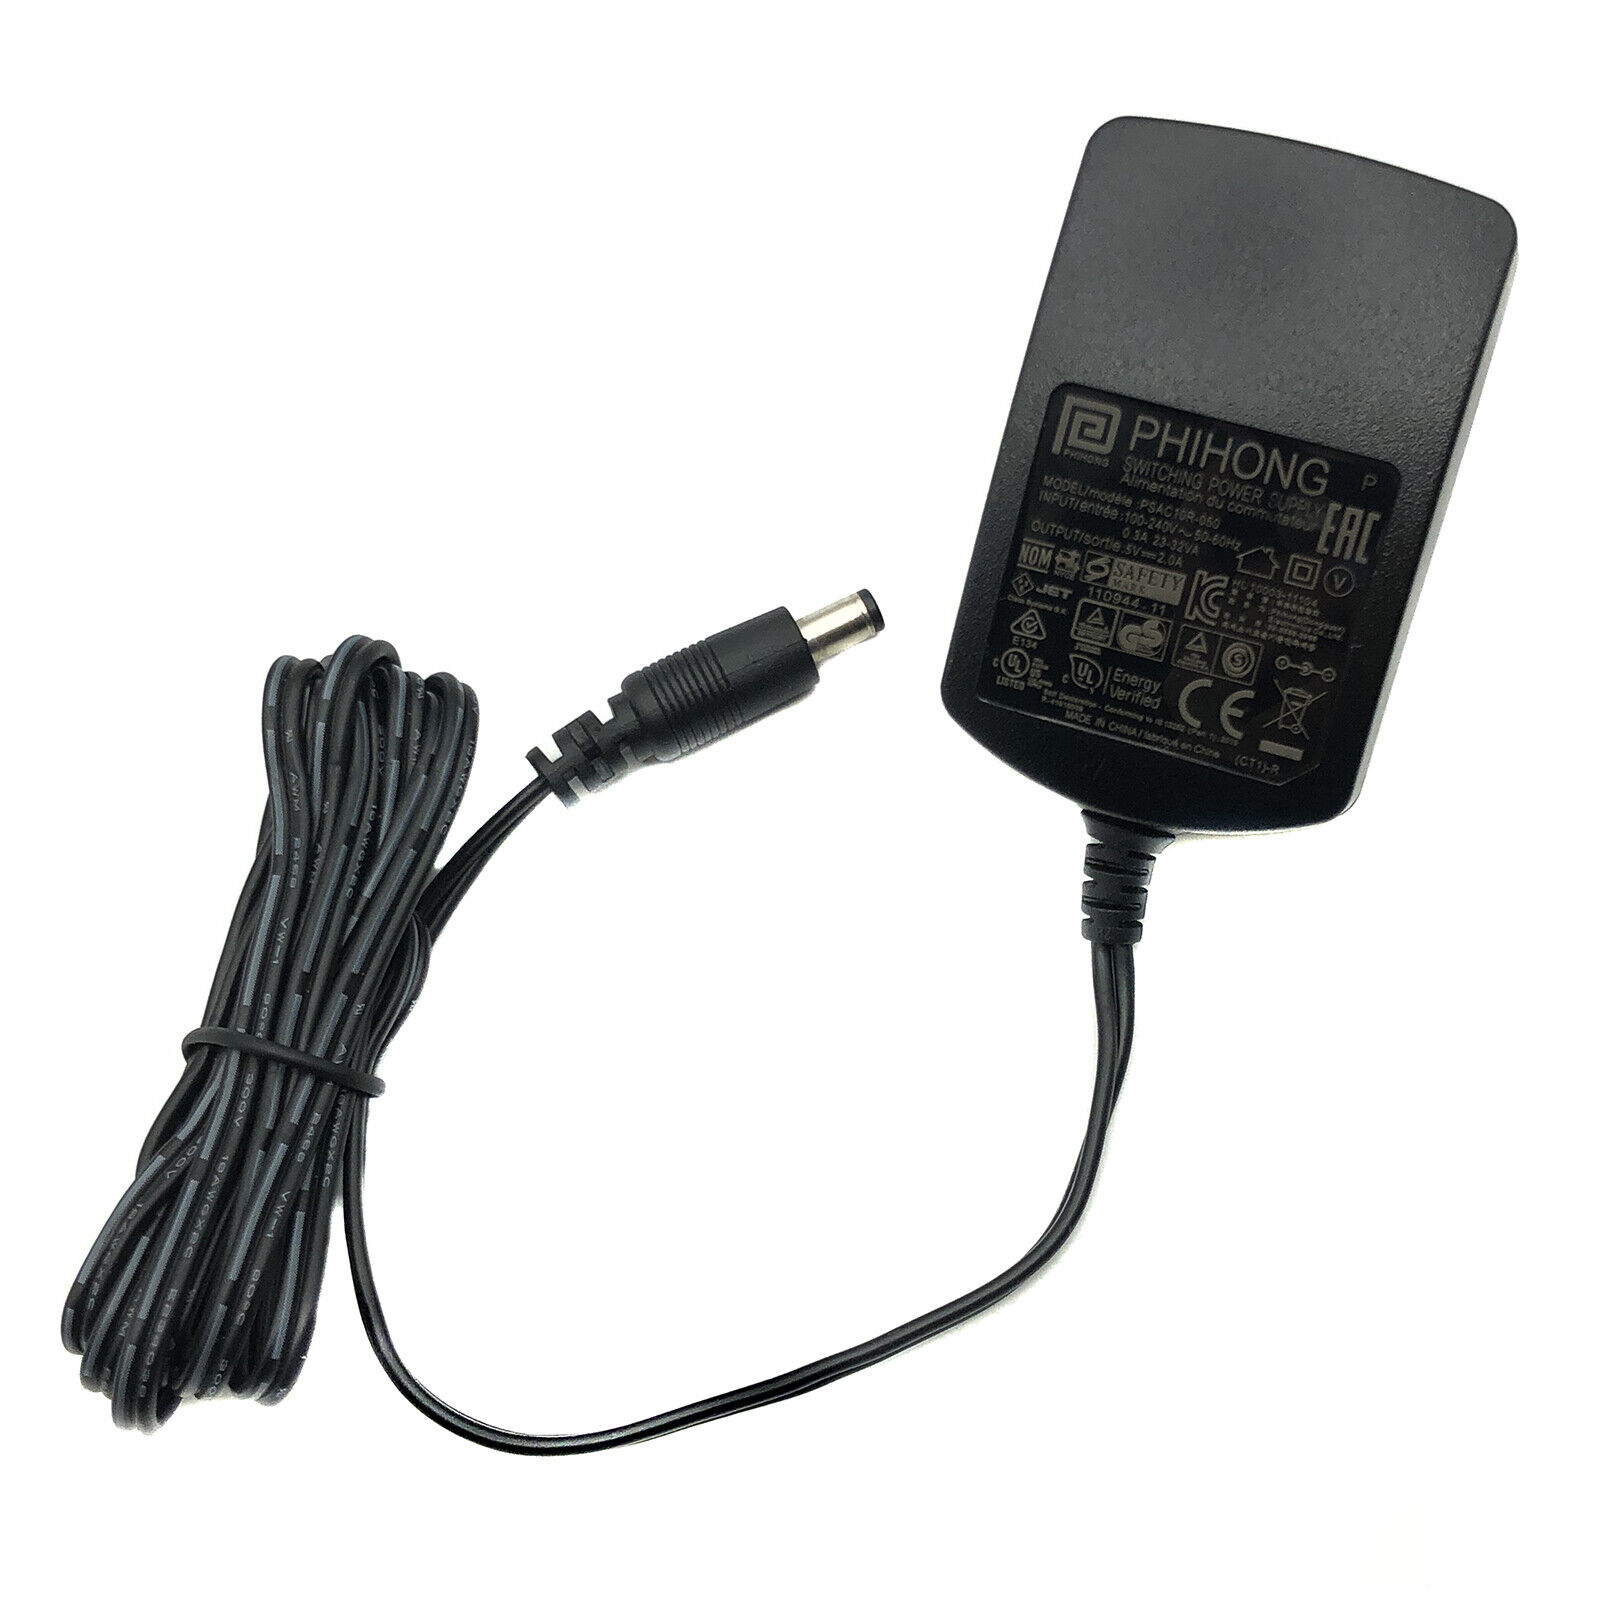 NEW Genuine Phihong PSAC10R-050 AC Adapter For Snom Voip Phone Switching Adapter